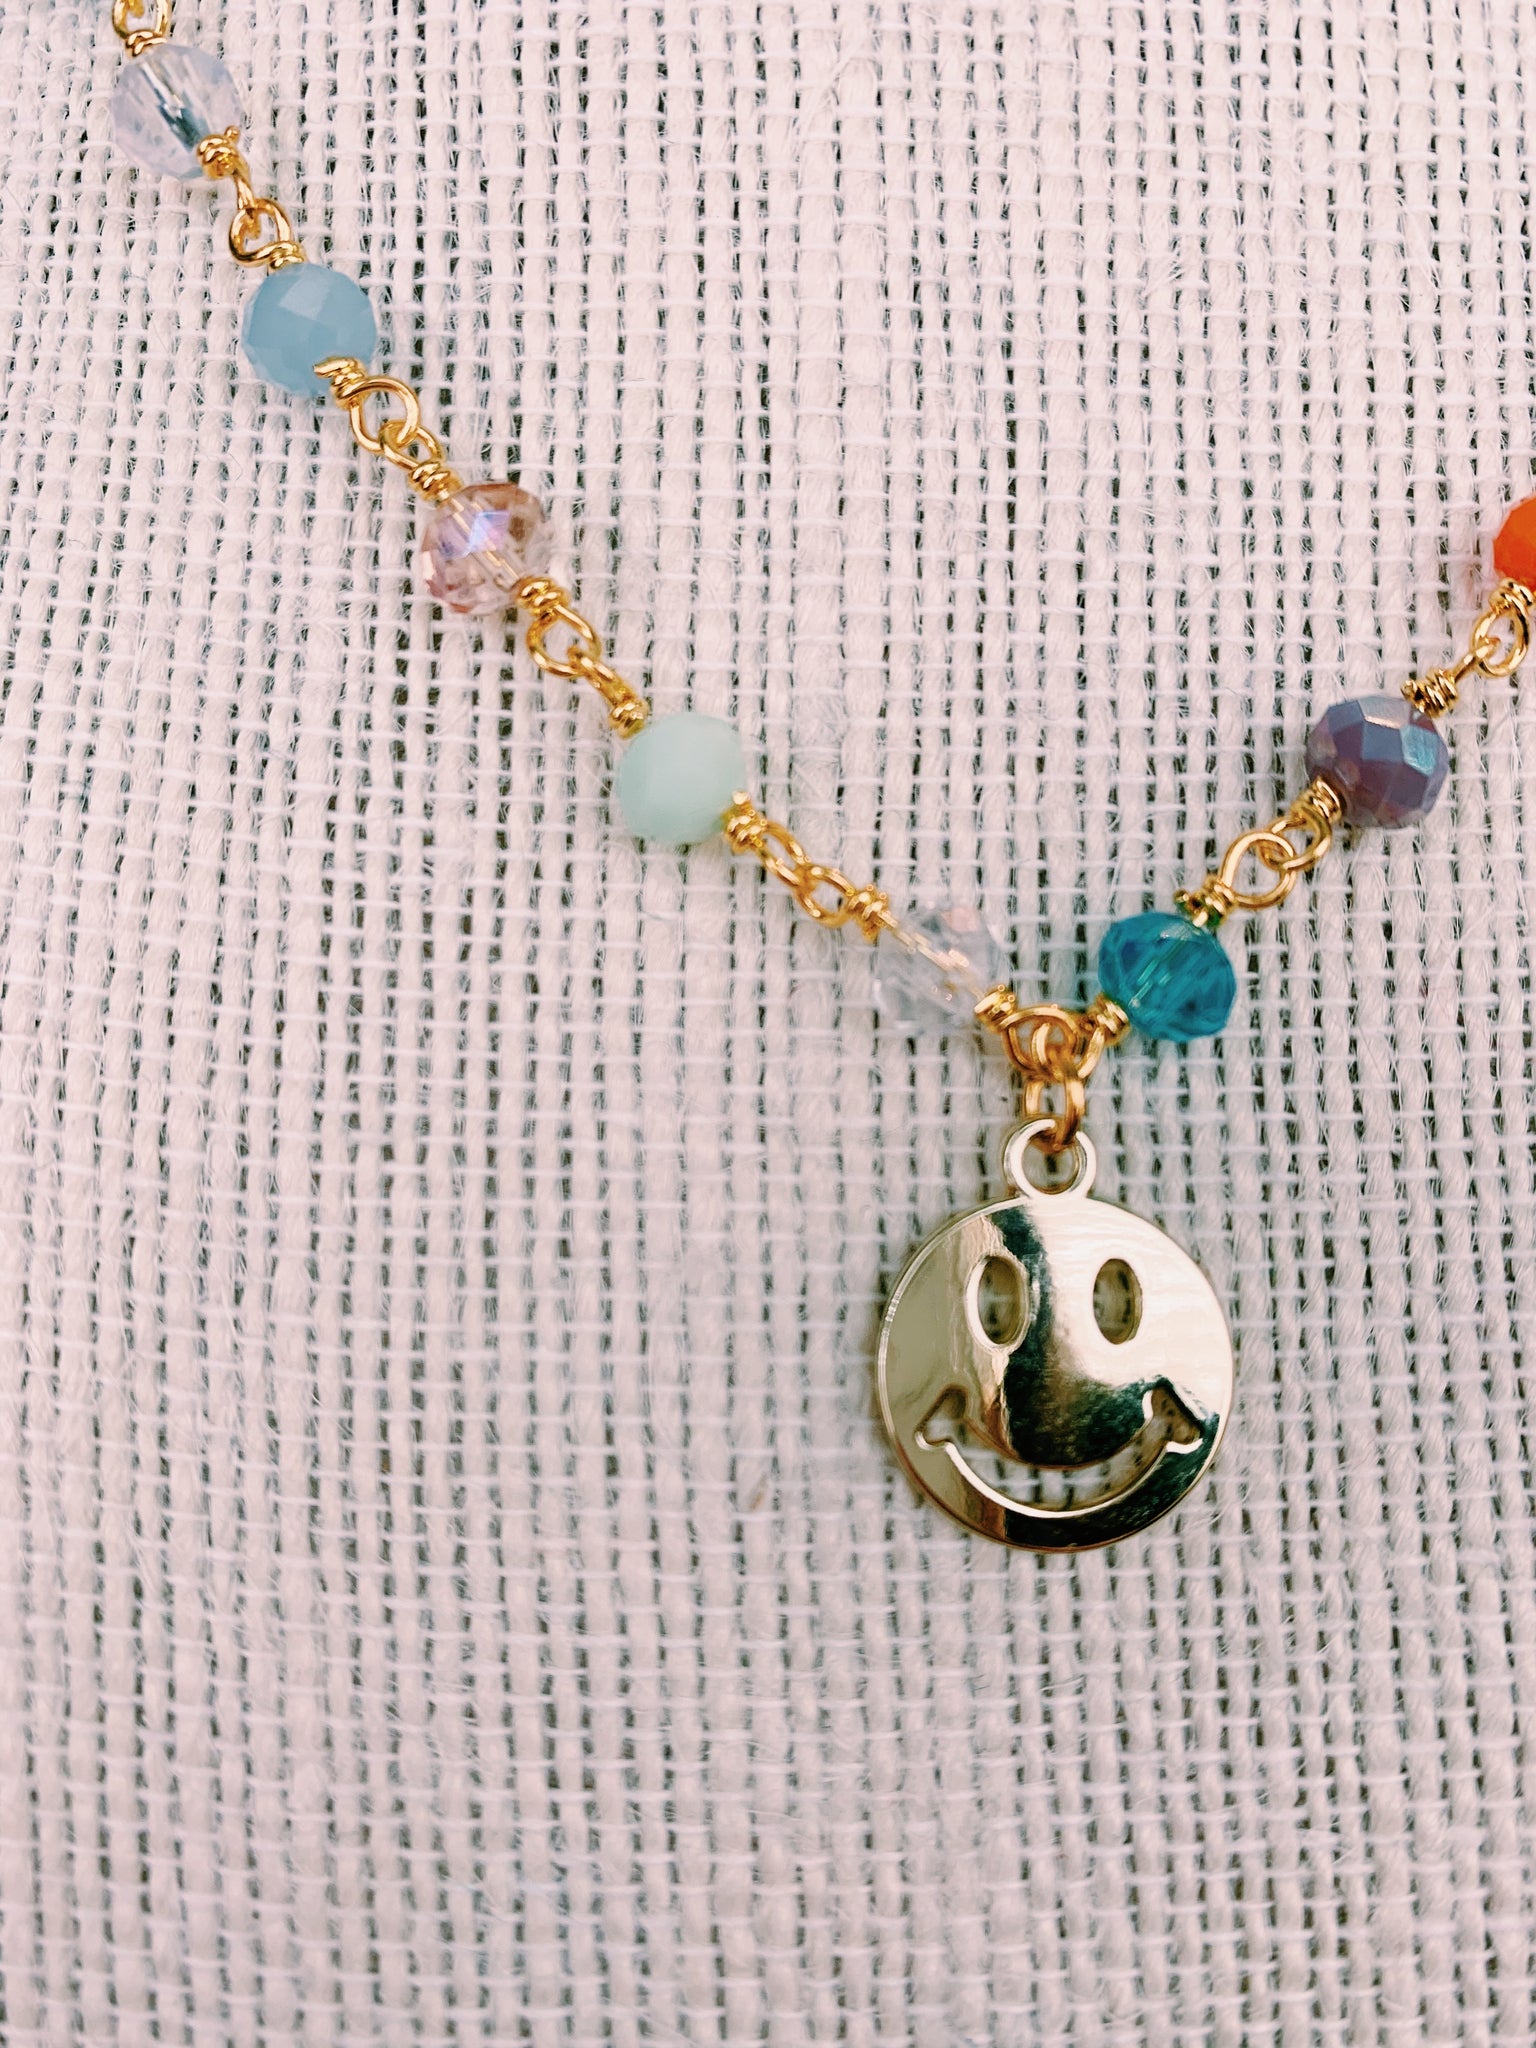 Smiley Face Necklace